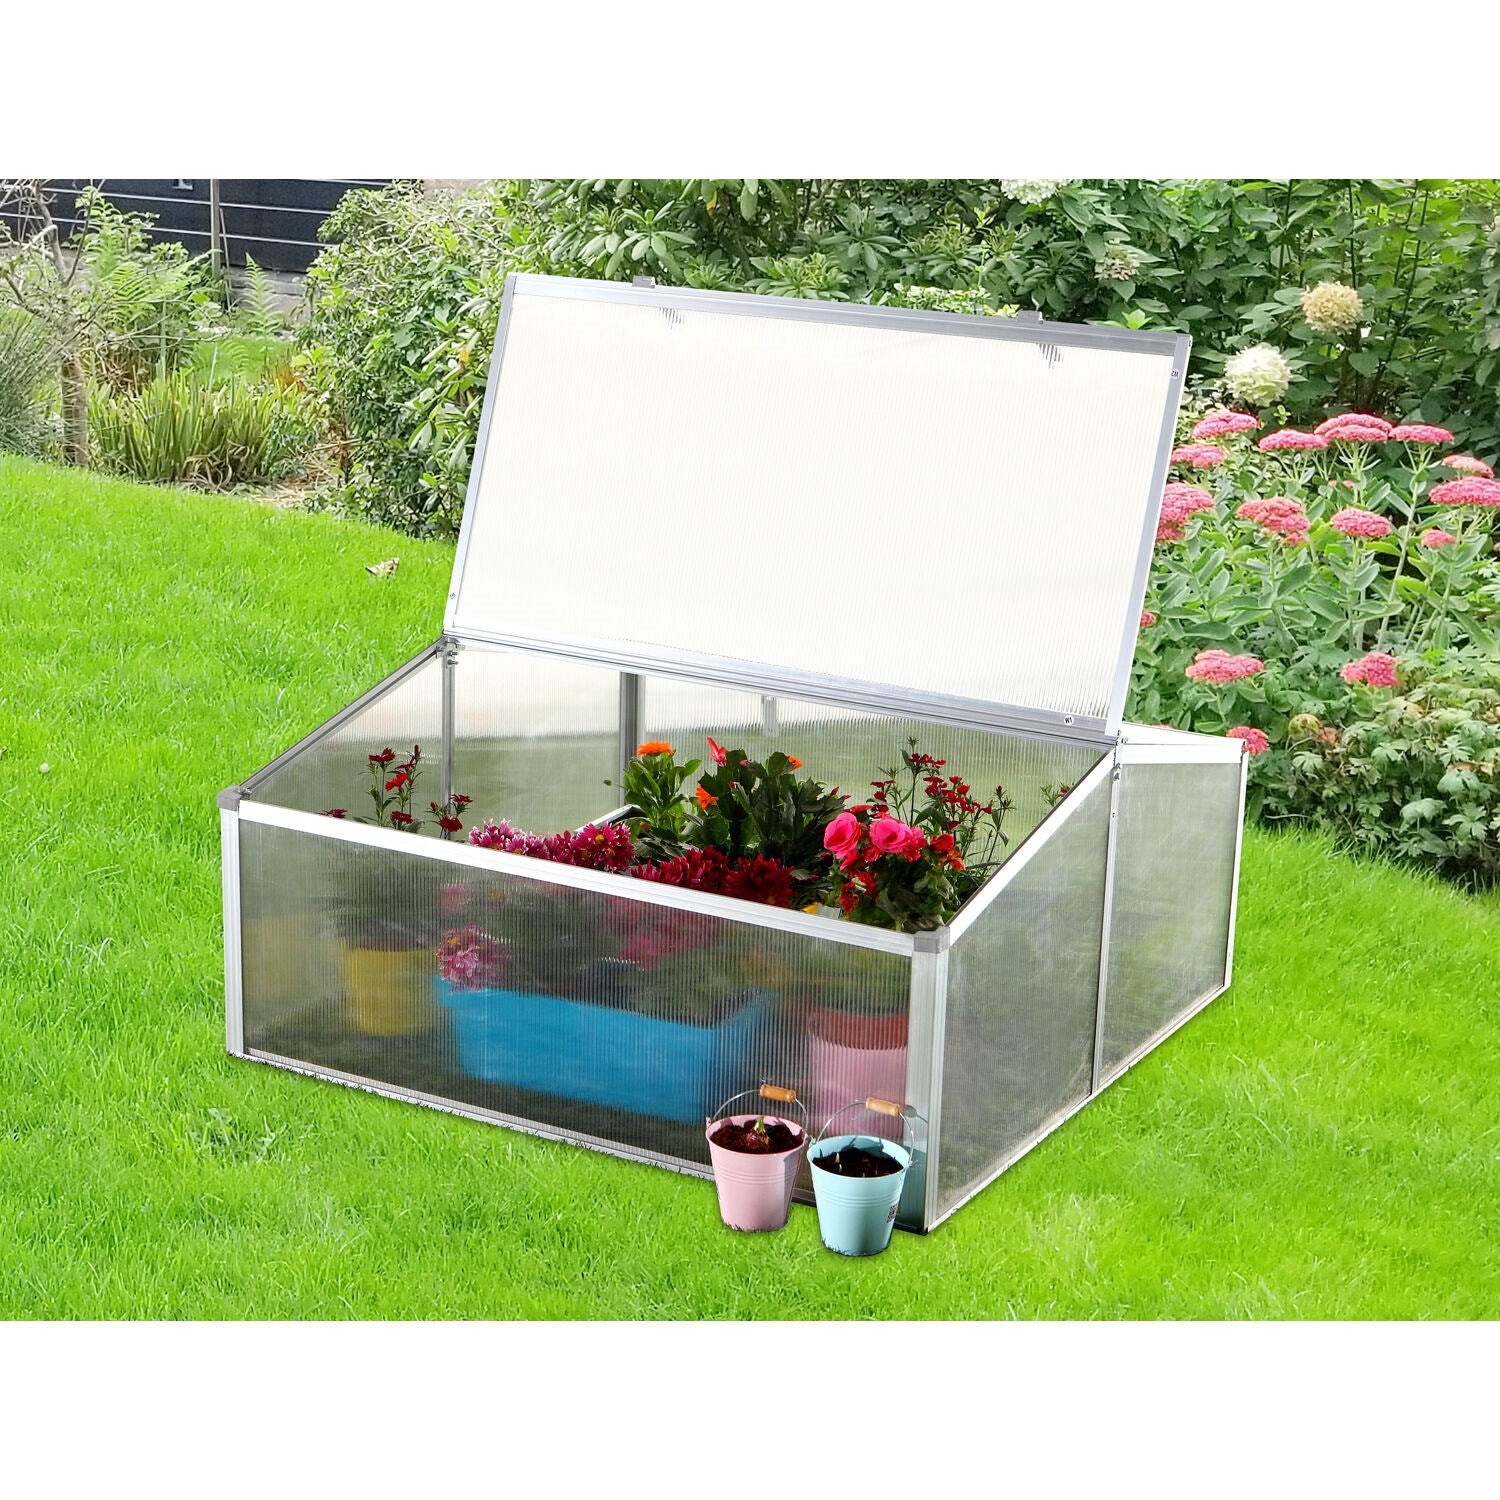 Hanover 39-In. Double Garden Bed Cold Frame Mini-Greenhouse Plant Protector - Lightweight and Portable